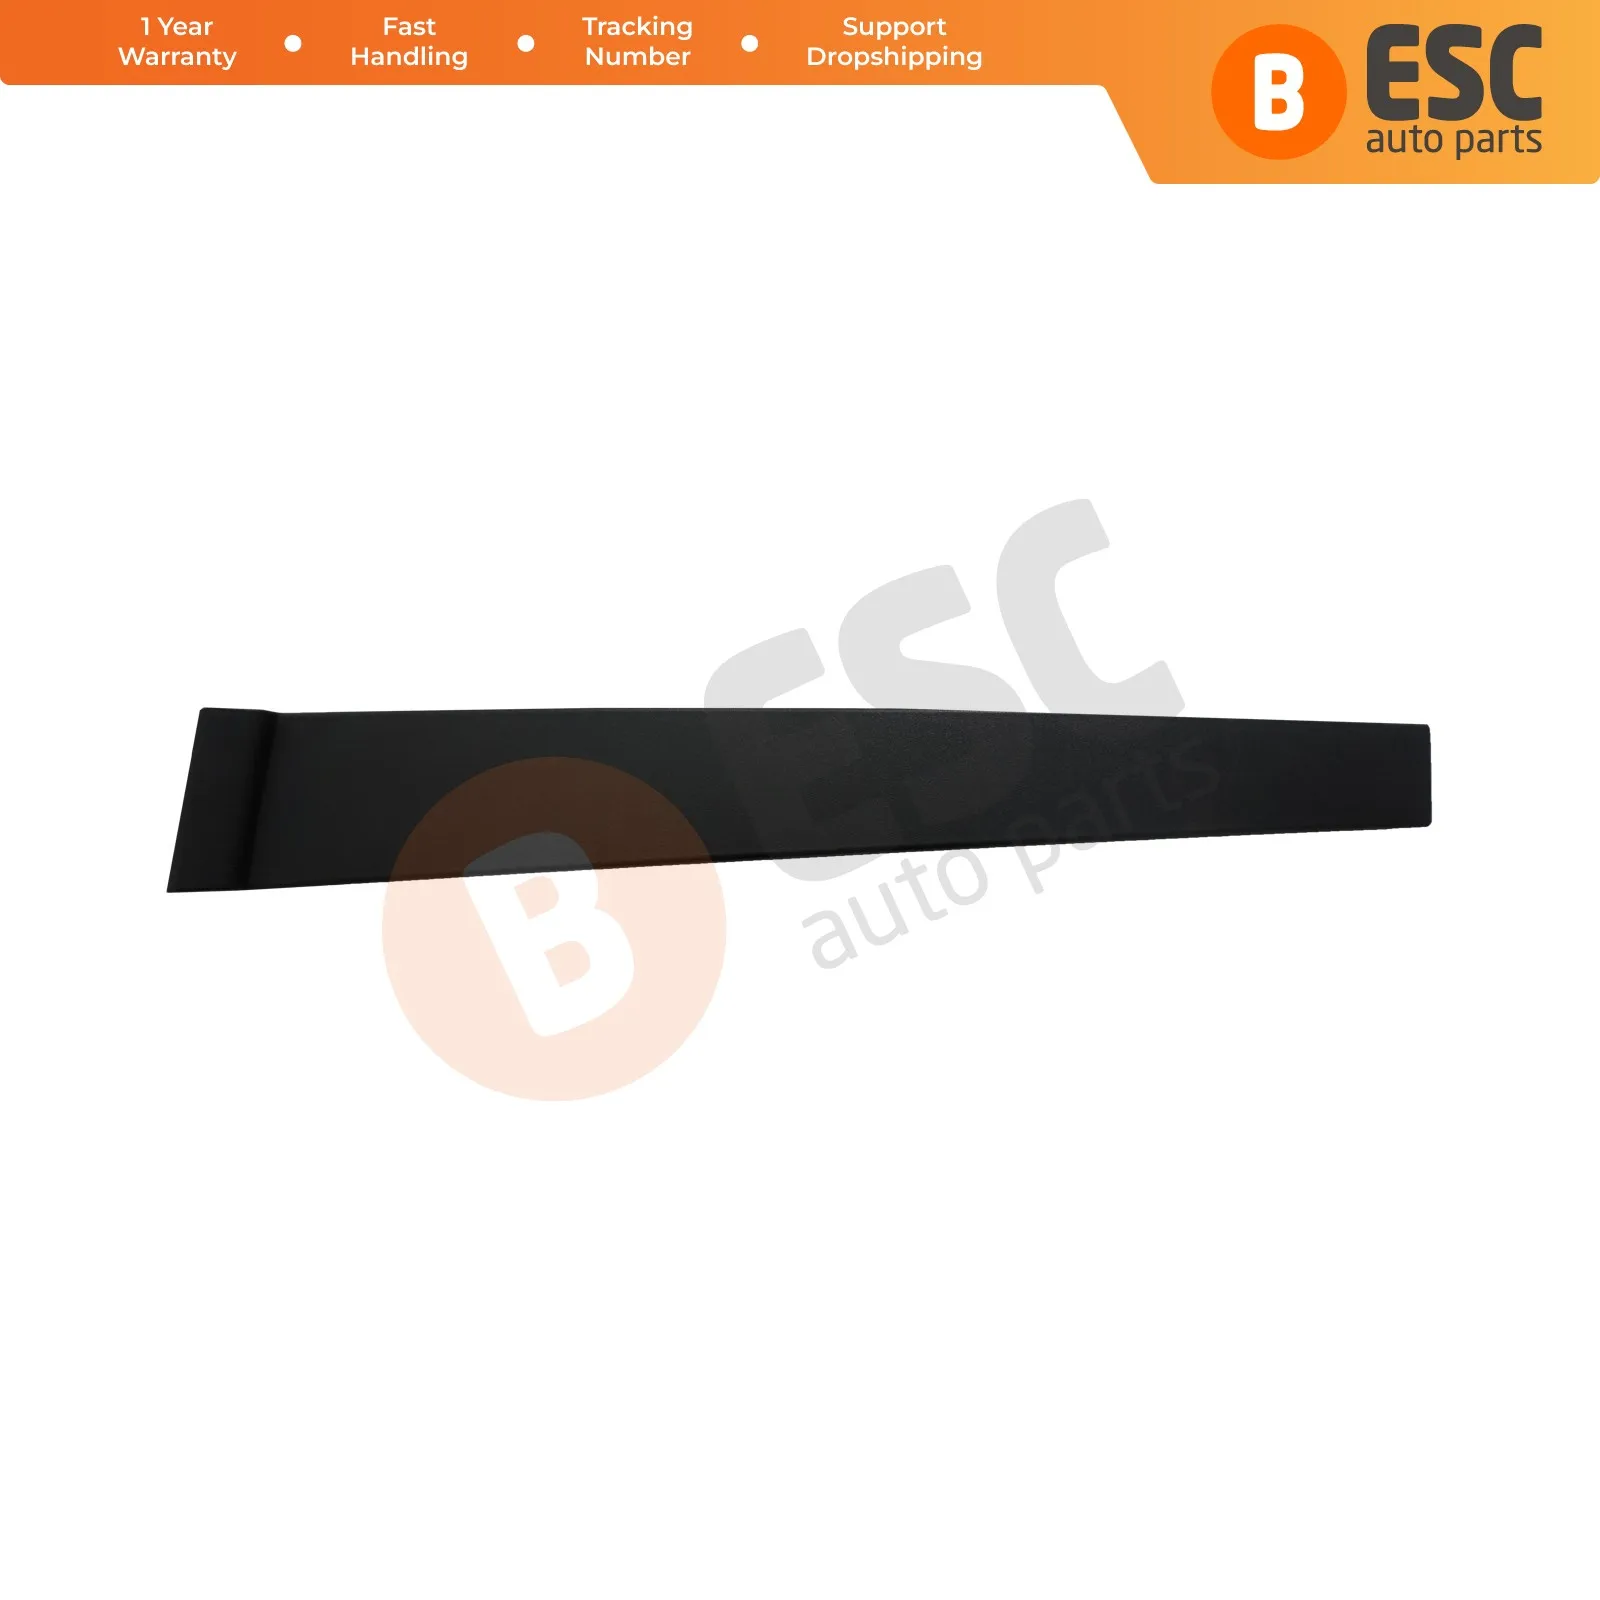 

ESC Auto Parts EDP878 Rear Right Door Pillar Trim Moulding 7N11N25458AA for Ford Fusion Europe Fast Shipment Ship From Turkey